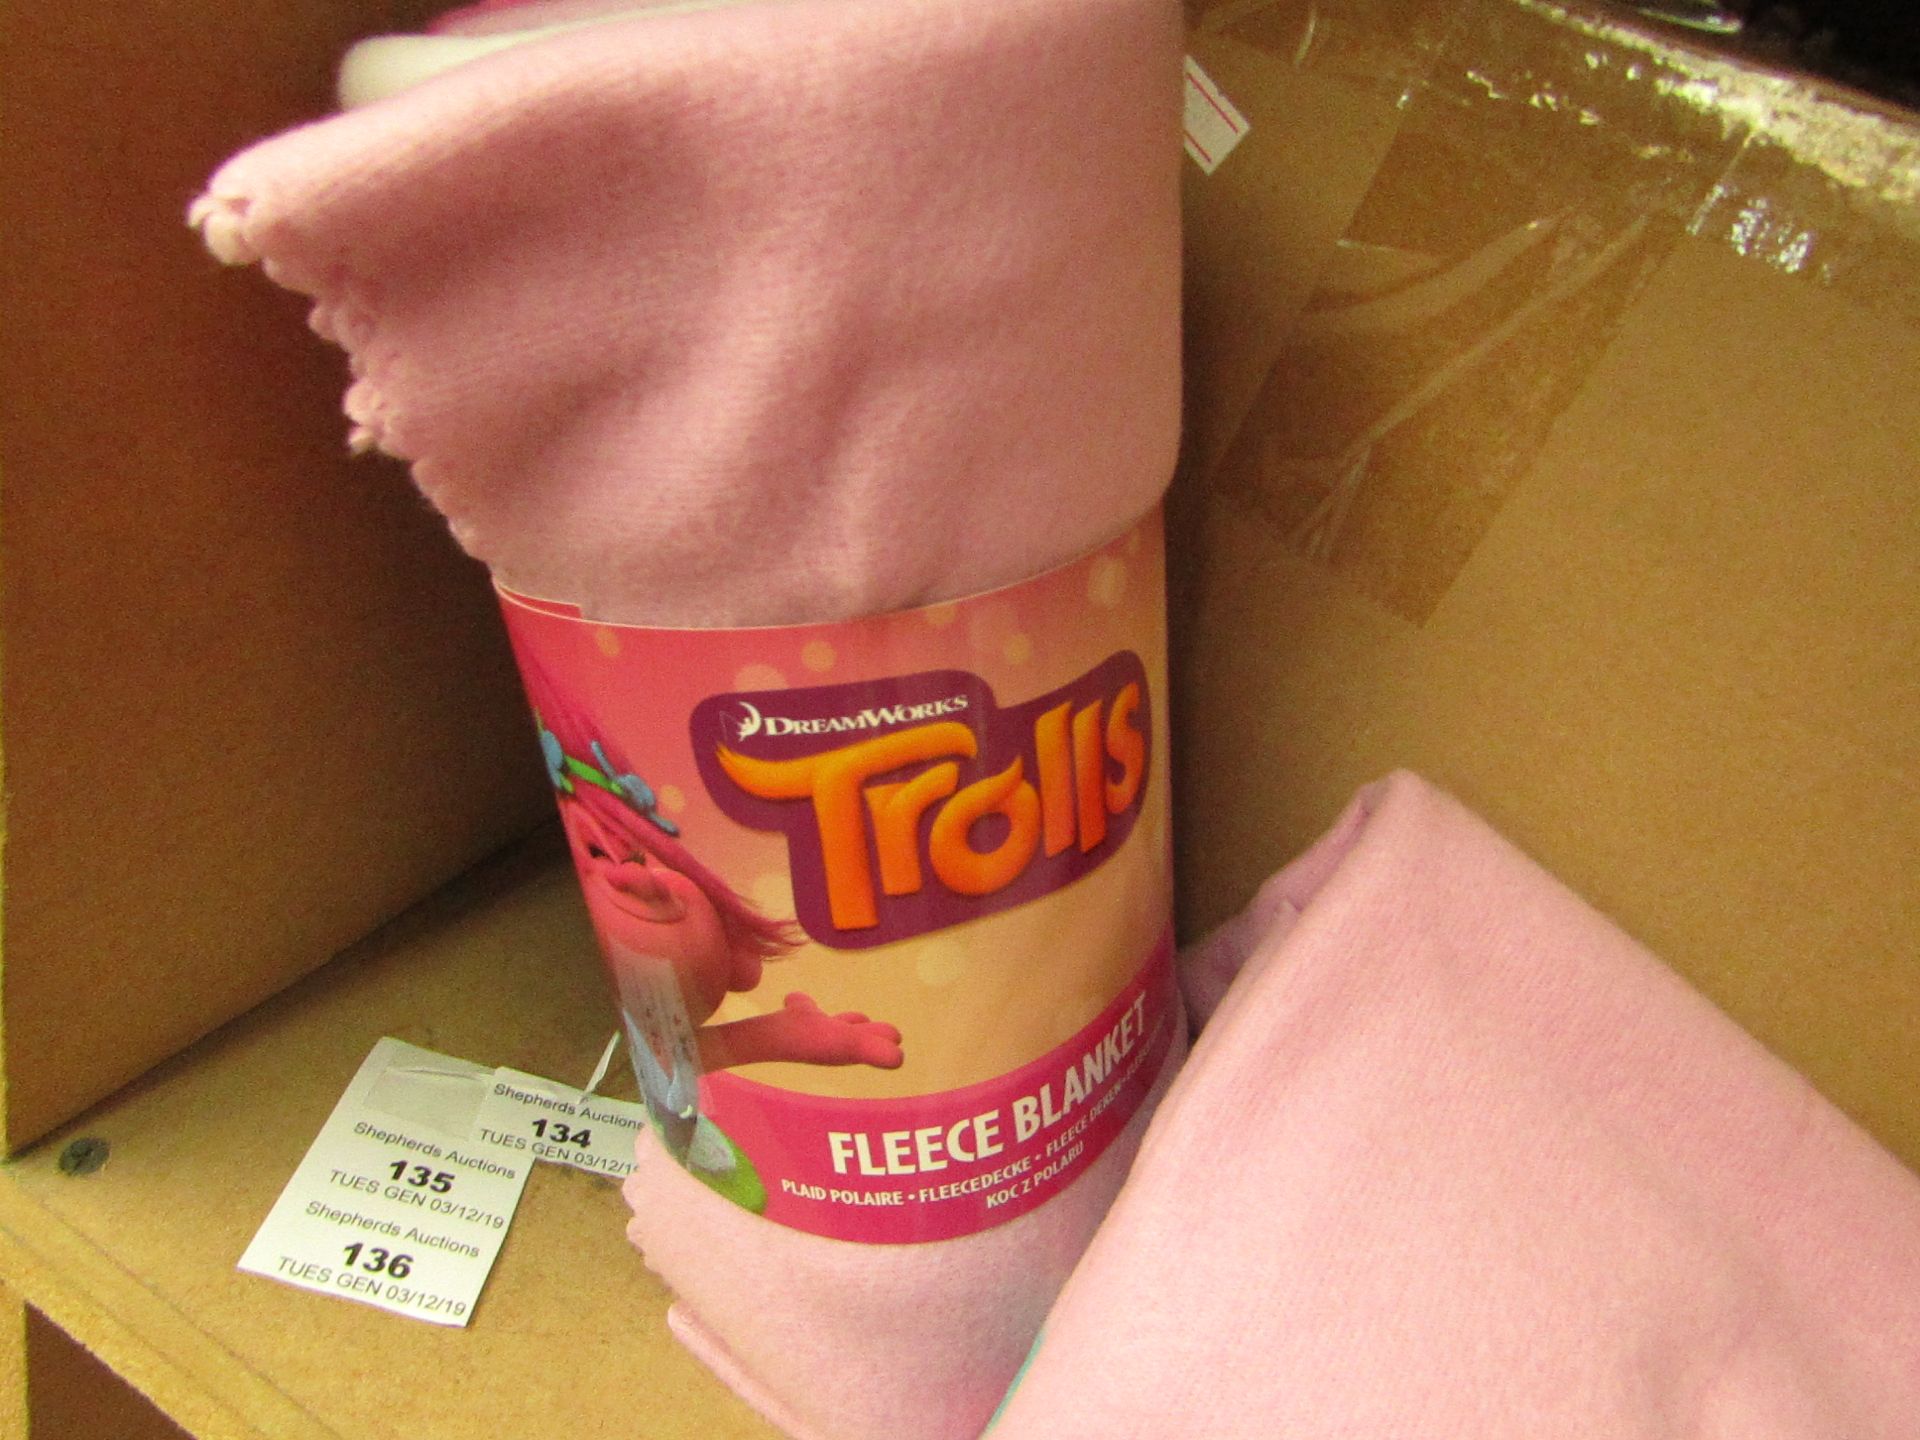 Trolls Fleece Blanket. New with Tags. Ideal Stocking filler.